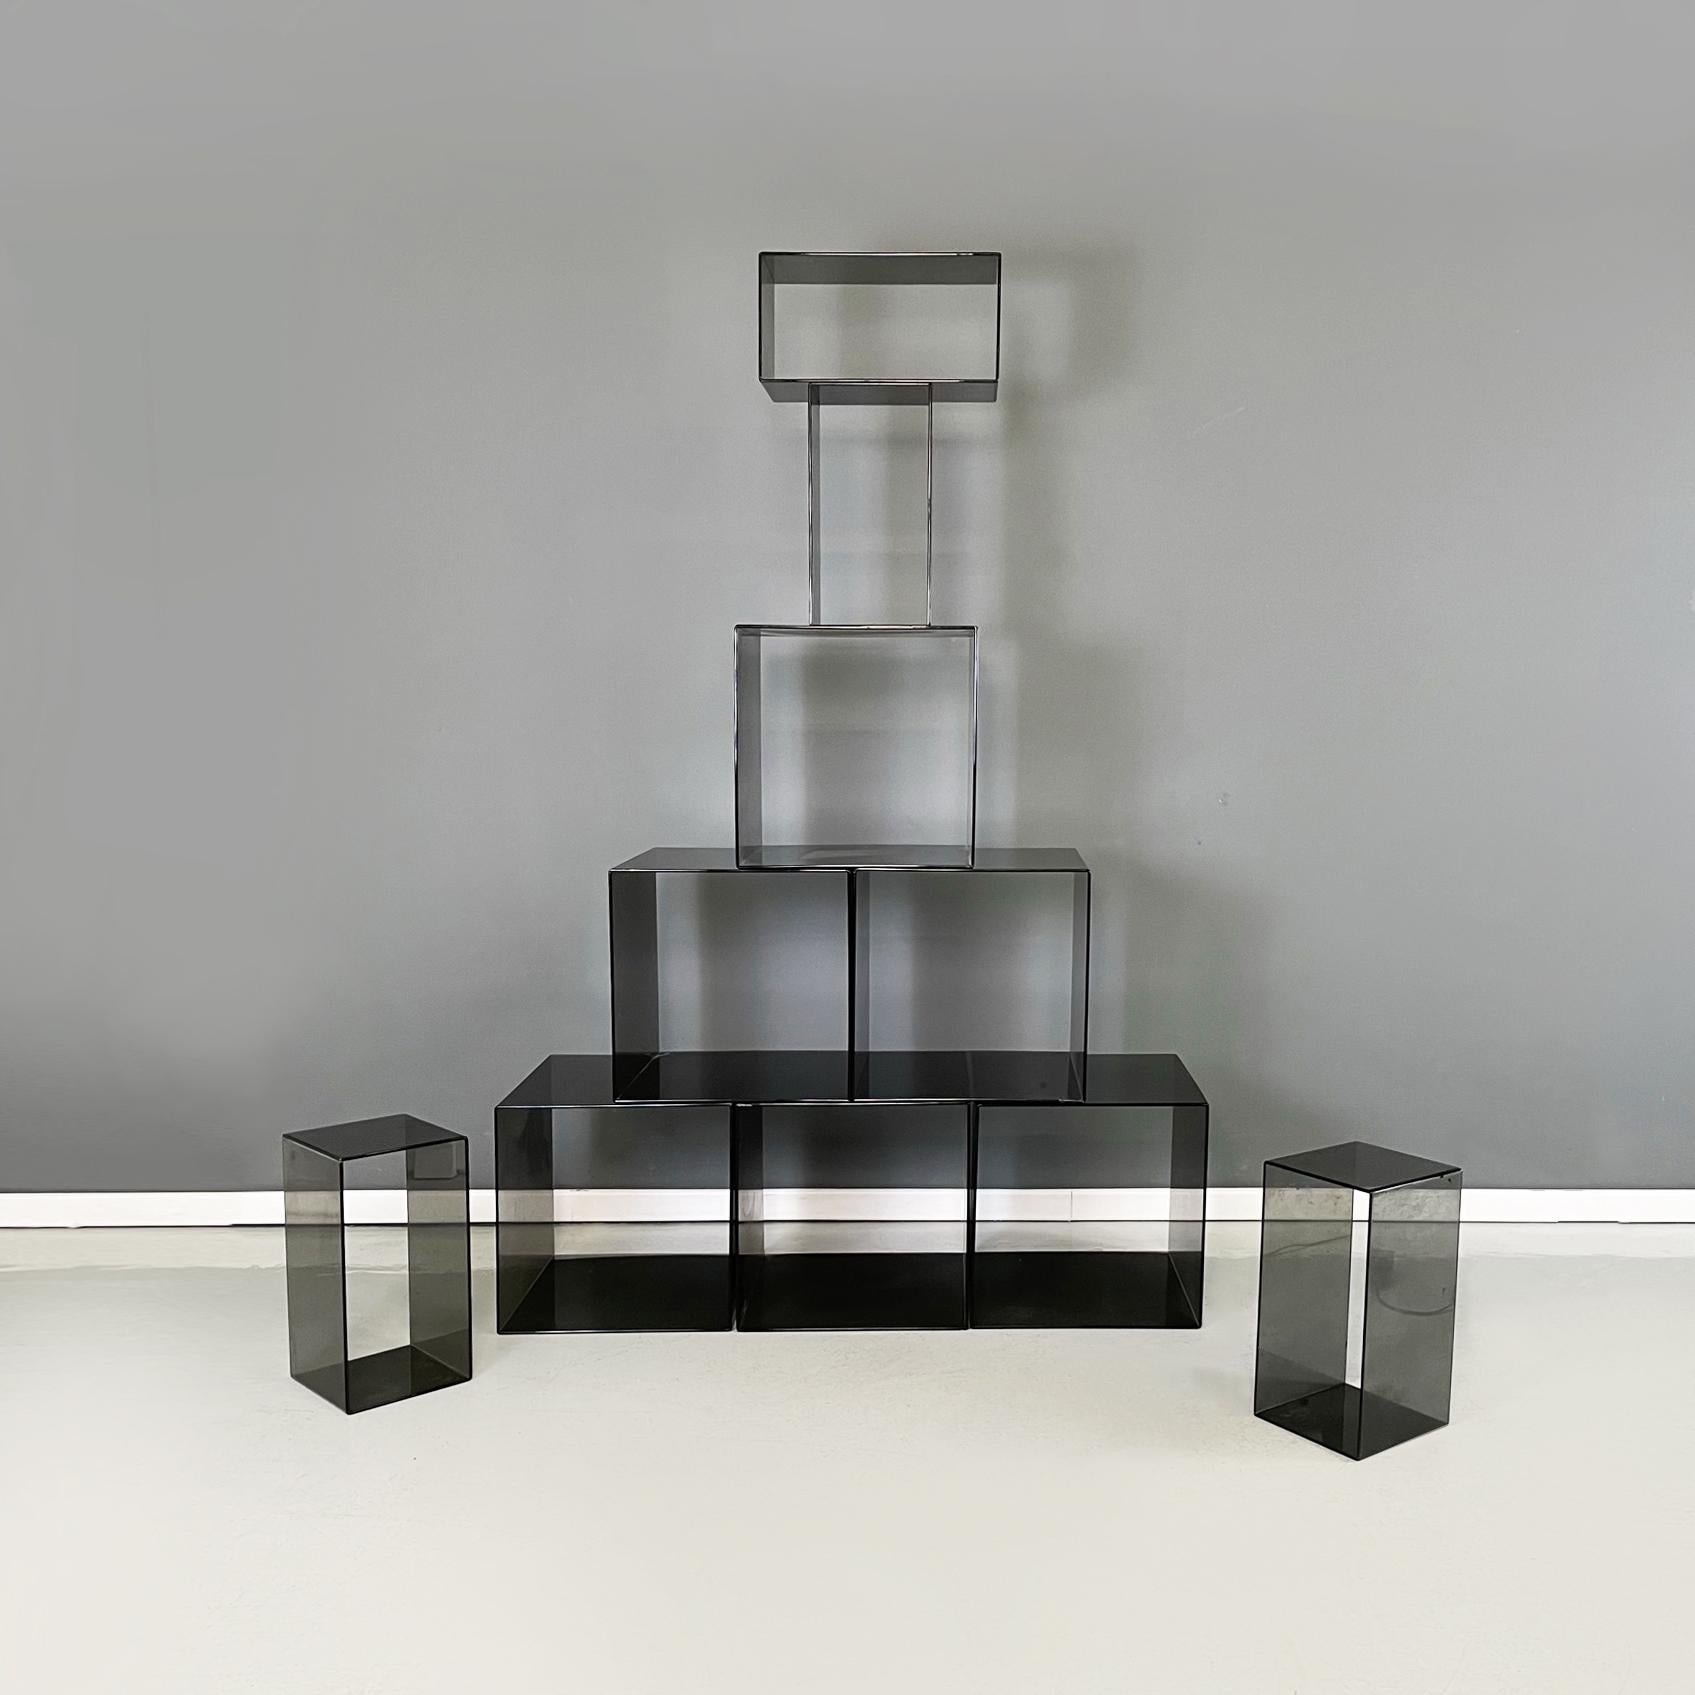 Italian modern Squared modular bookcase or display in smoked plexiglass, 1990s
Modular bookcase made entirely of smoked plexiglass. The modules are 6 squares and 4 rectangles, with rounded corners. The 10 modules can be positioned as desired. The